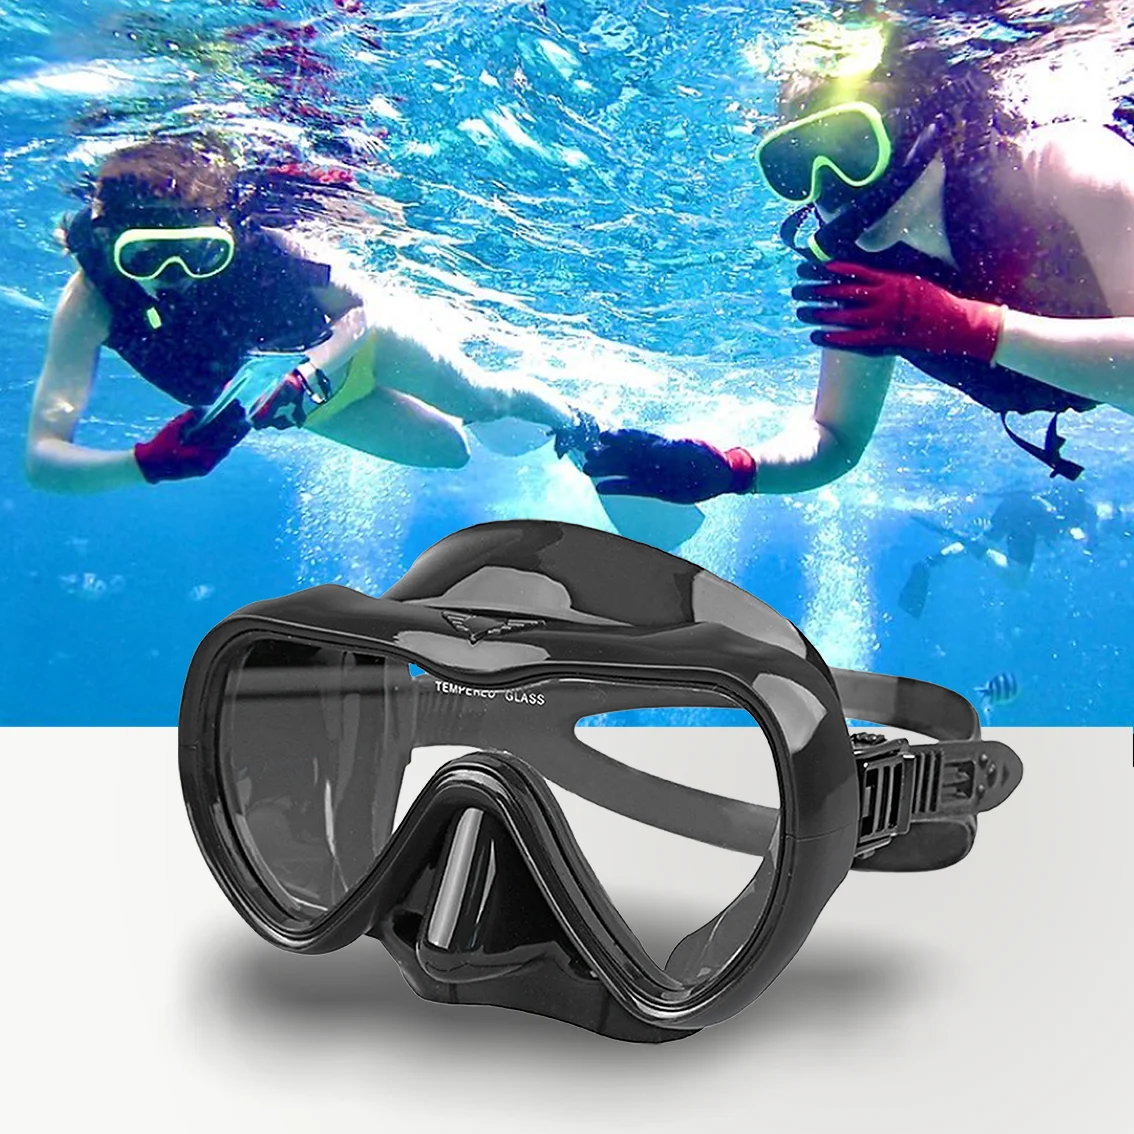 Diving Snorkeling Face Mirror Low Capacity Diving Face Mirror Scuba Diving Suit Wet Tube Water Sports Equipment Tempered Glass for apple watch series 7 41mm silicone outdoor sports watch band hard pc case with built in tempered glass screen protector size s m england lavender